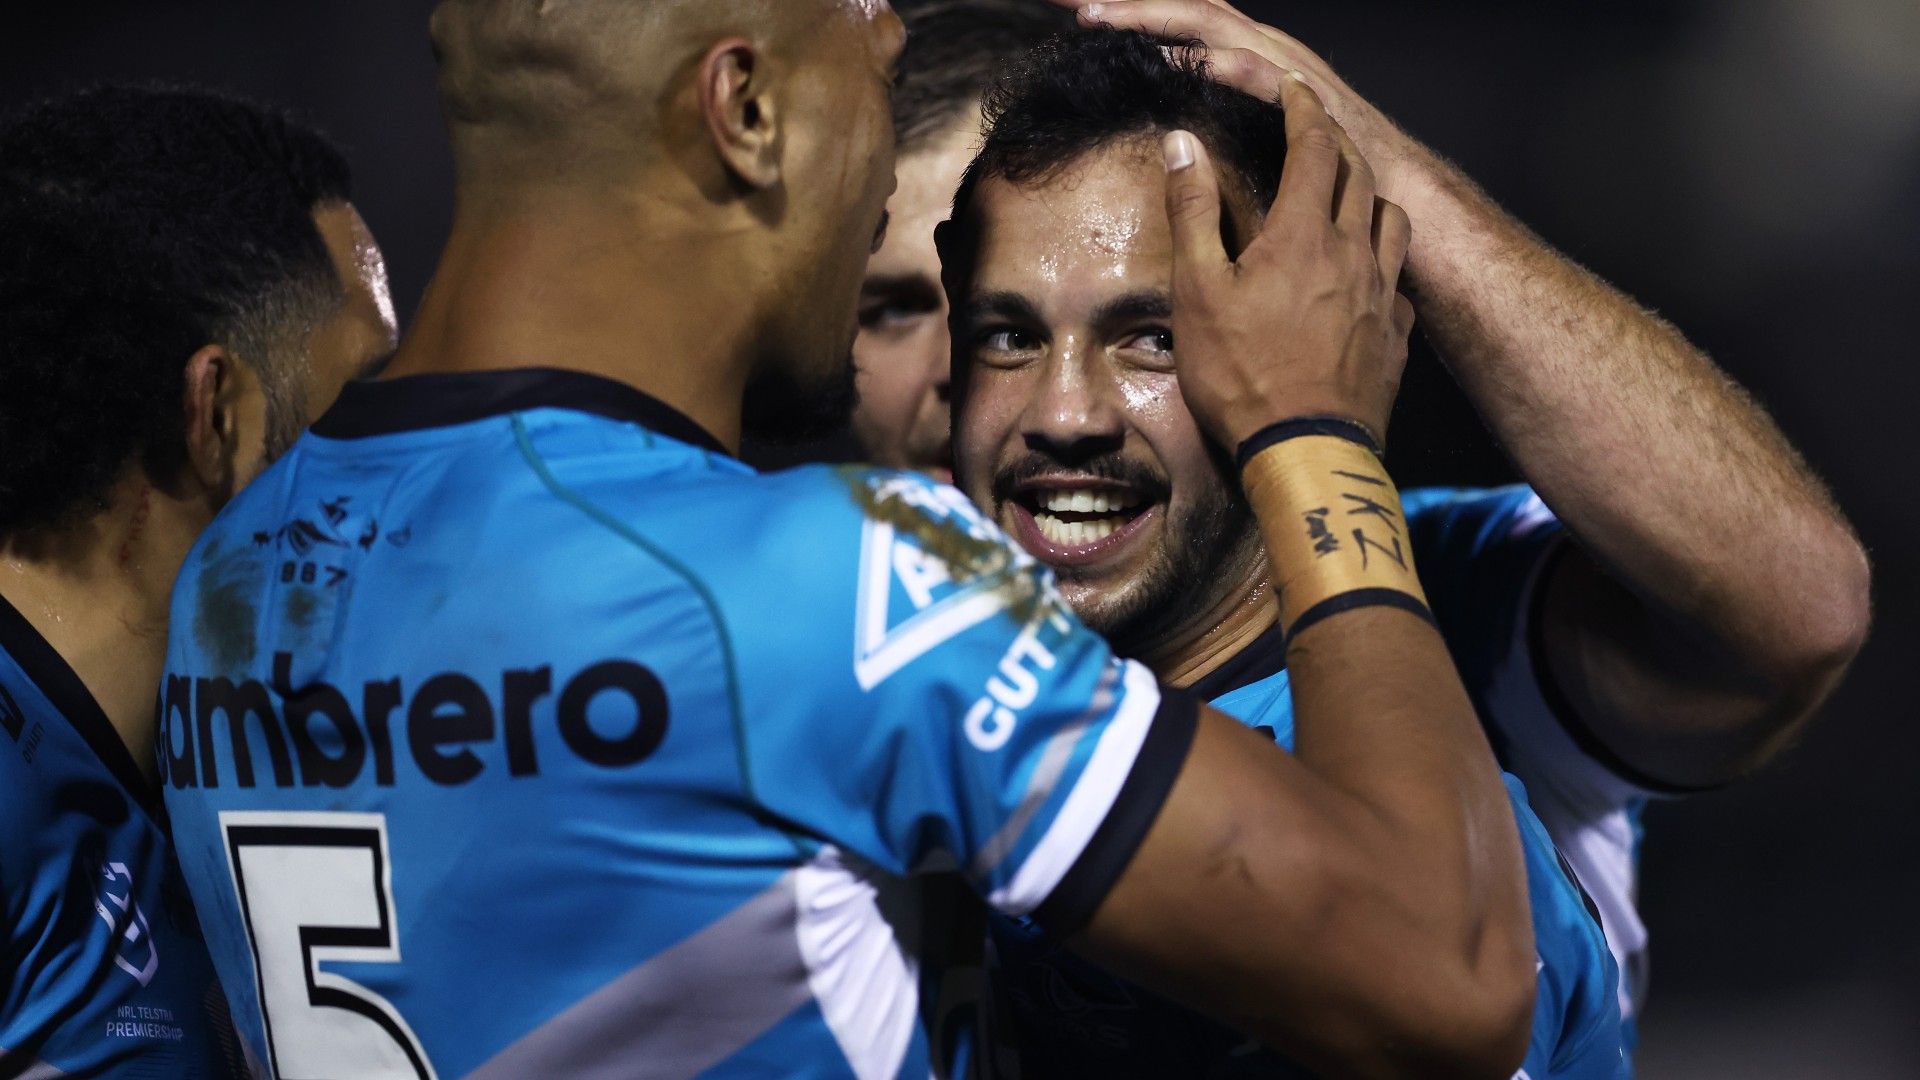 Braydon Trindall of the Sharks celebrates with team mates after scoring a try during the round 21 NRL match between the Cronulla Sharks and the St George Illawarra Dragons at PointsBet Stadium